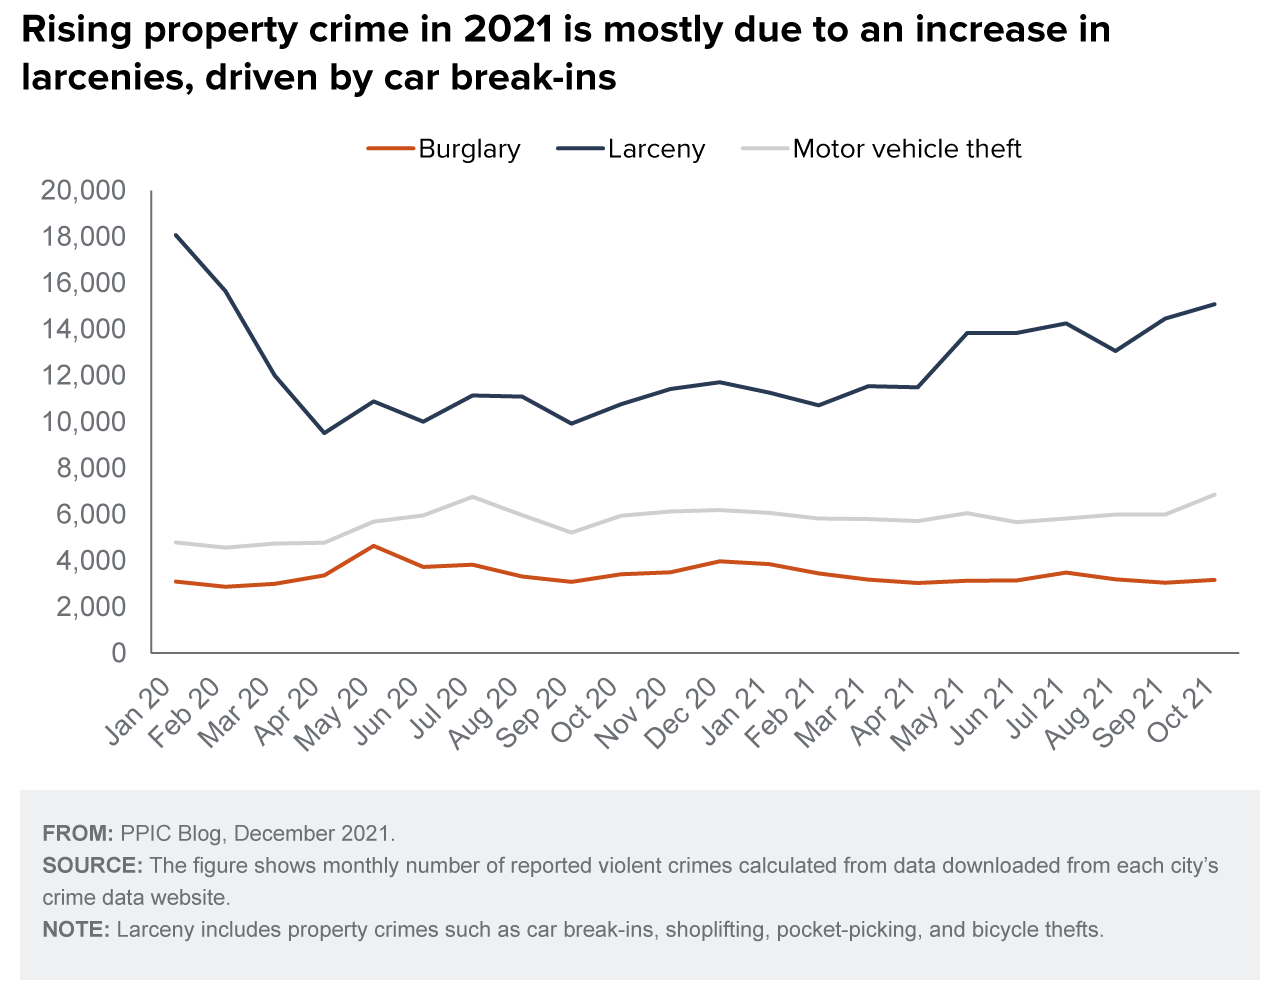 figure - Rising property crime in 2021 is mostly due to an increase in larcenies, driven by car break-ins